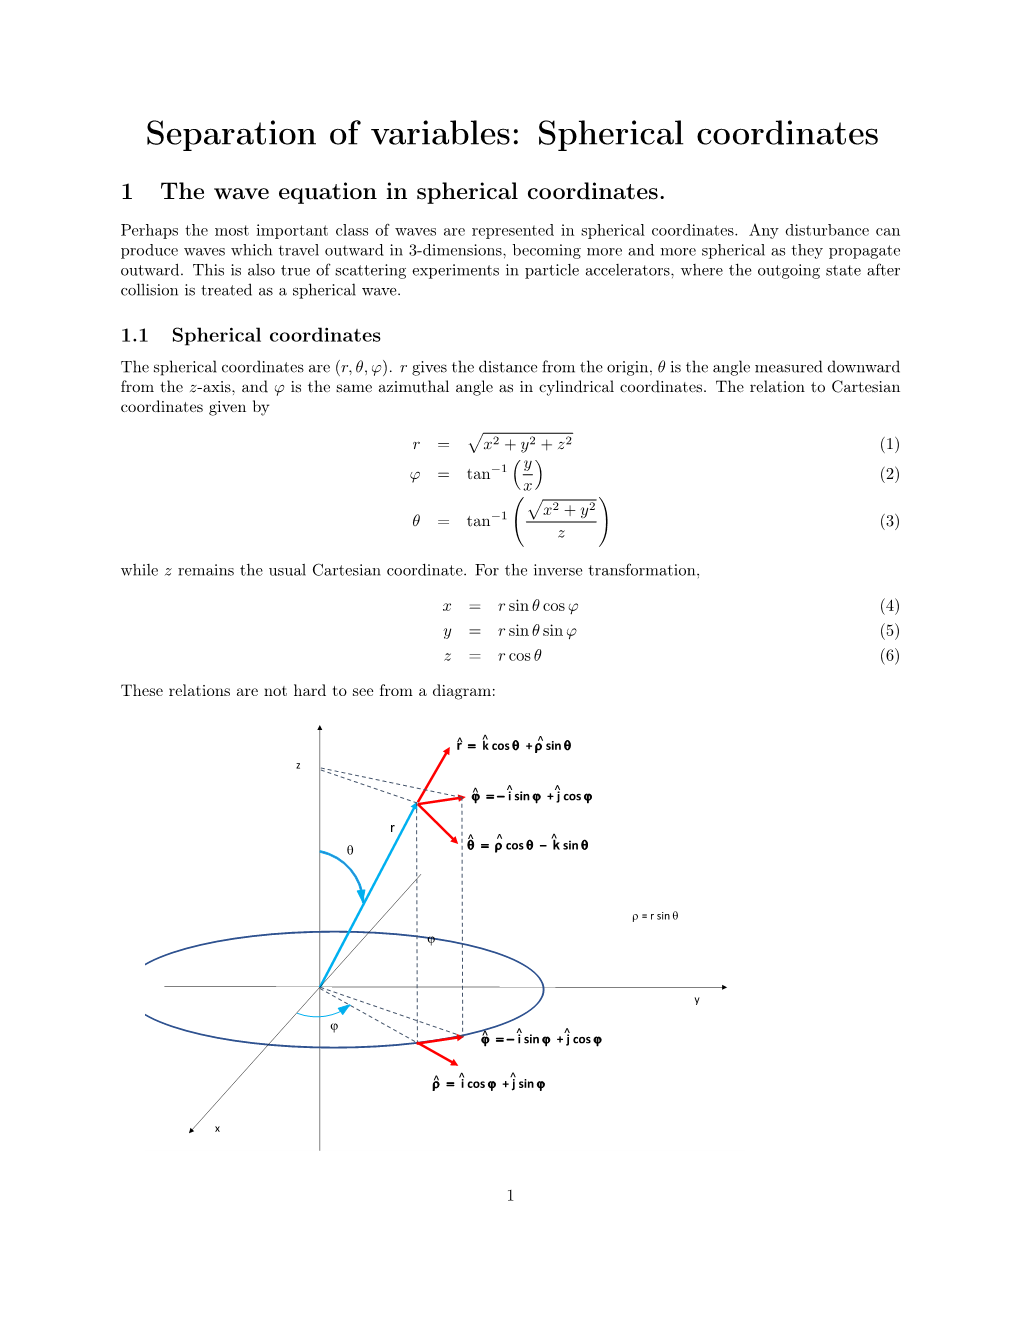 Separation of Variables: Spherical Coordinates